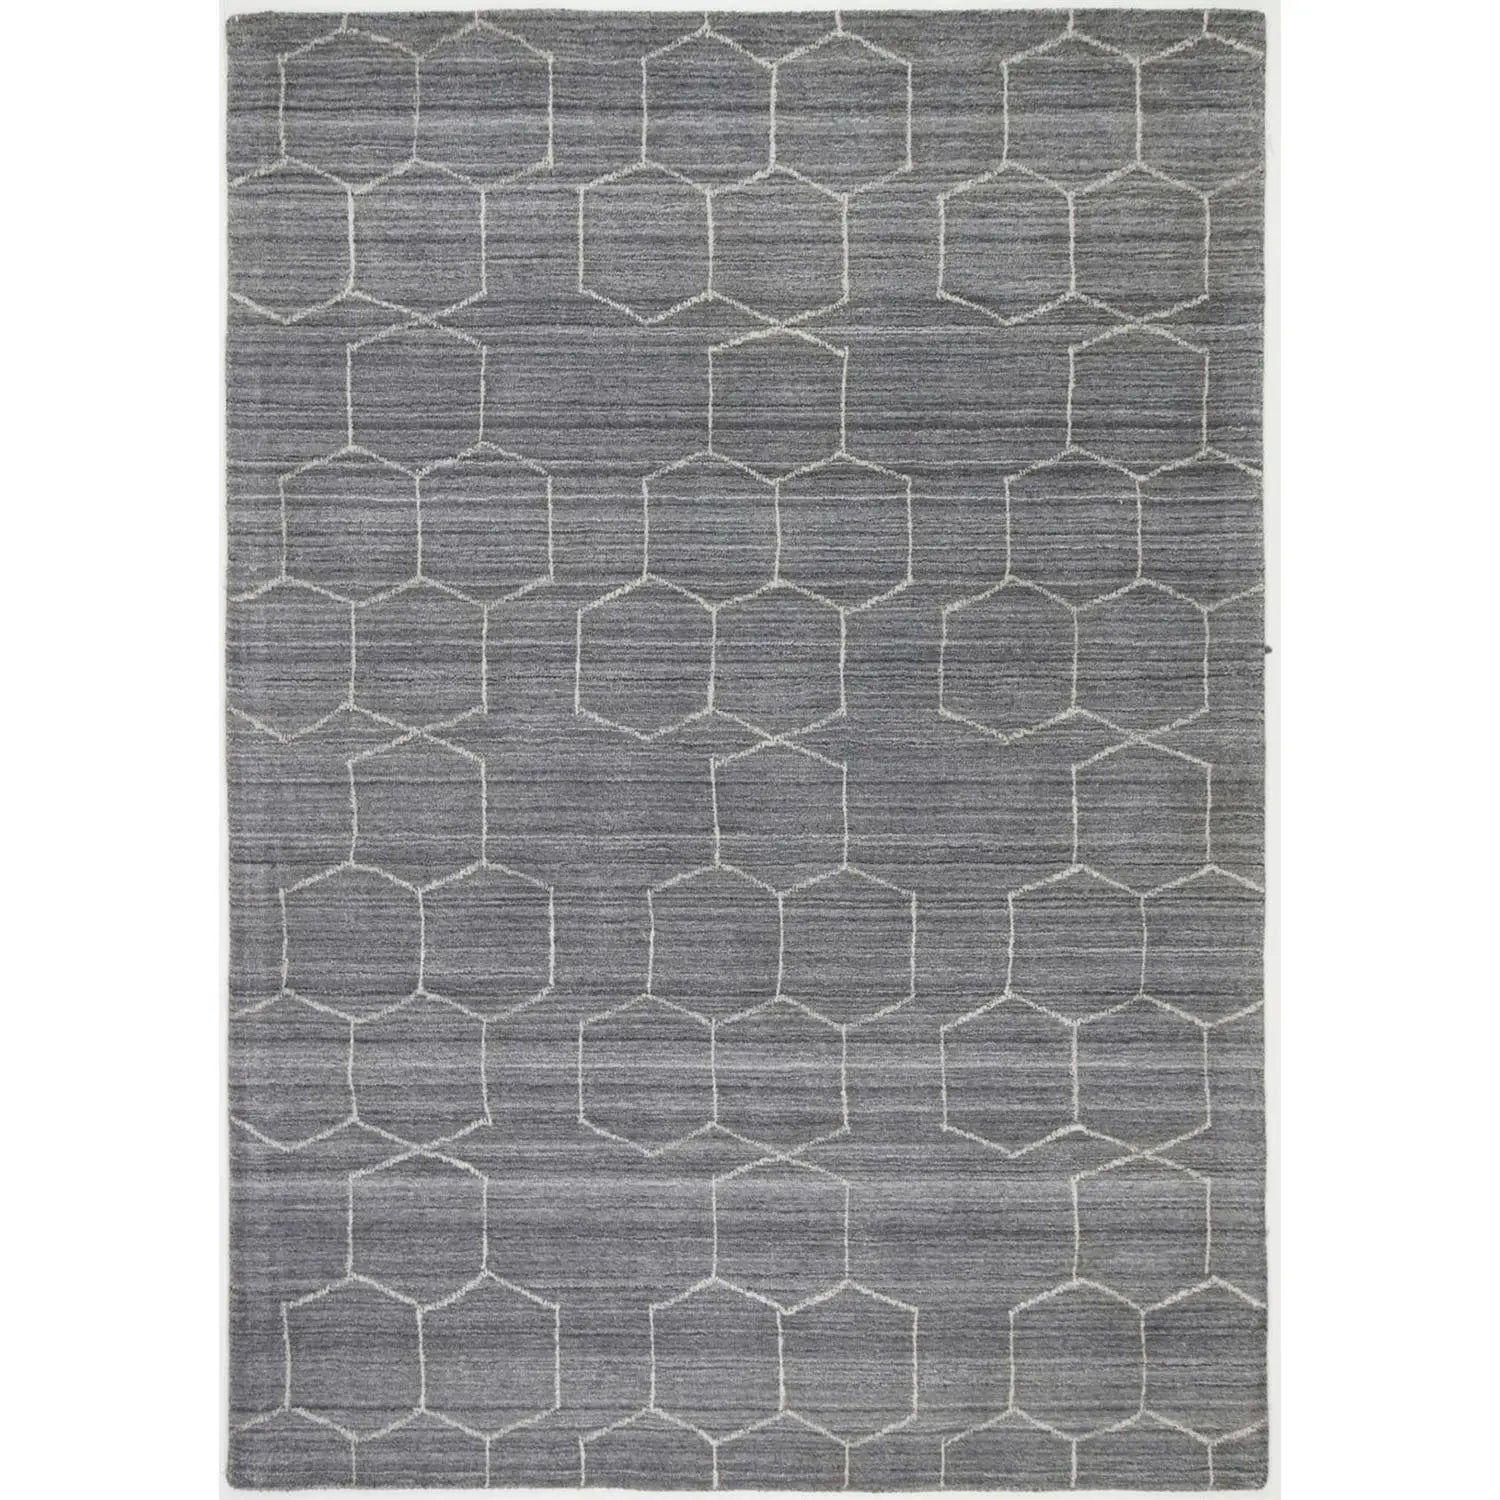 Cholula Hive Grey-White Patterned Rug - Rugs - Rugs a Million